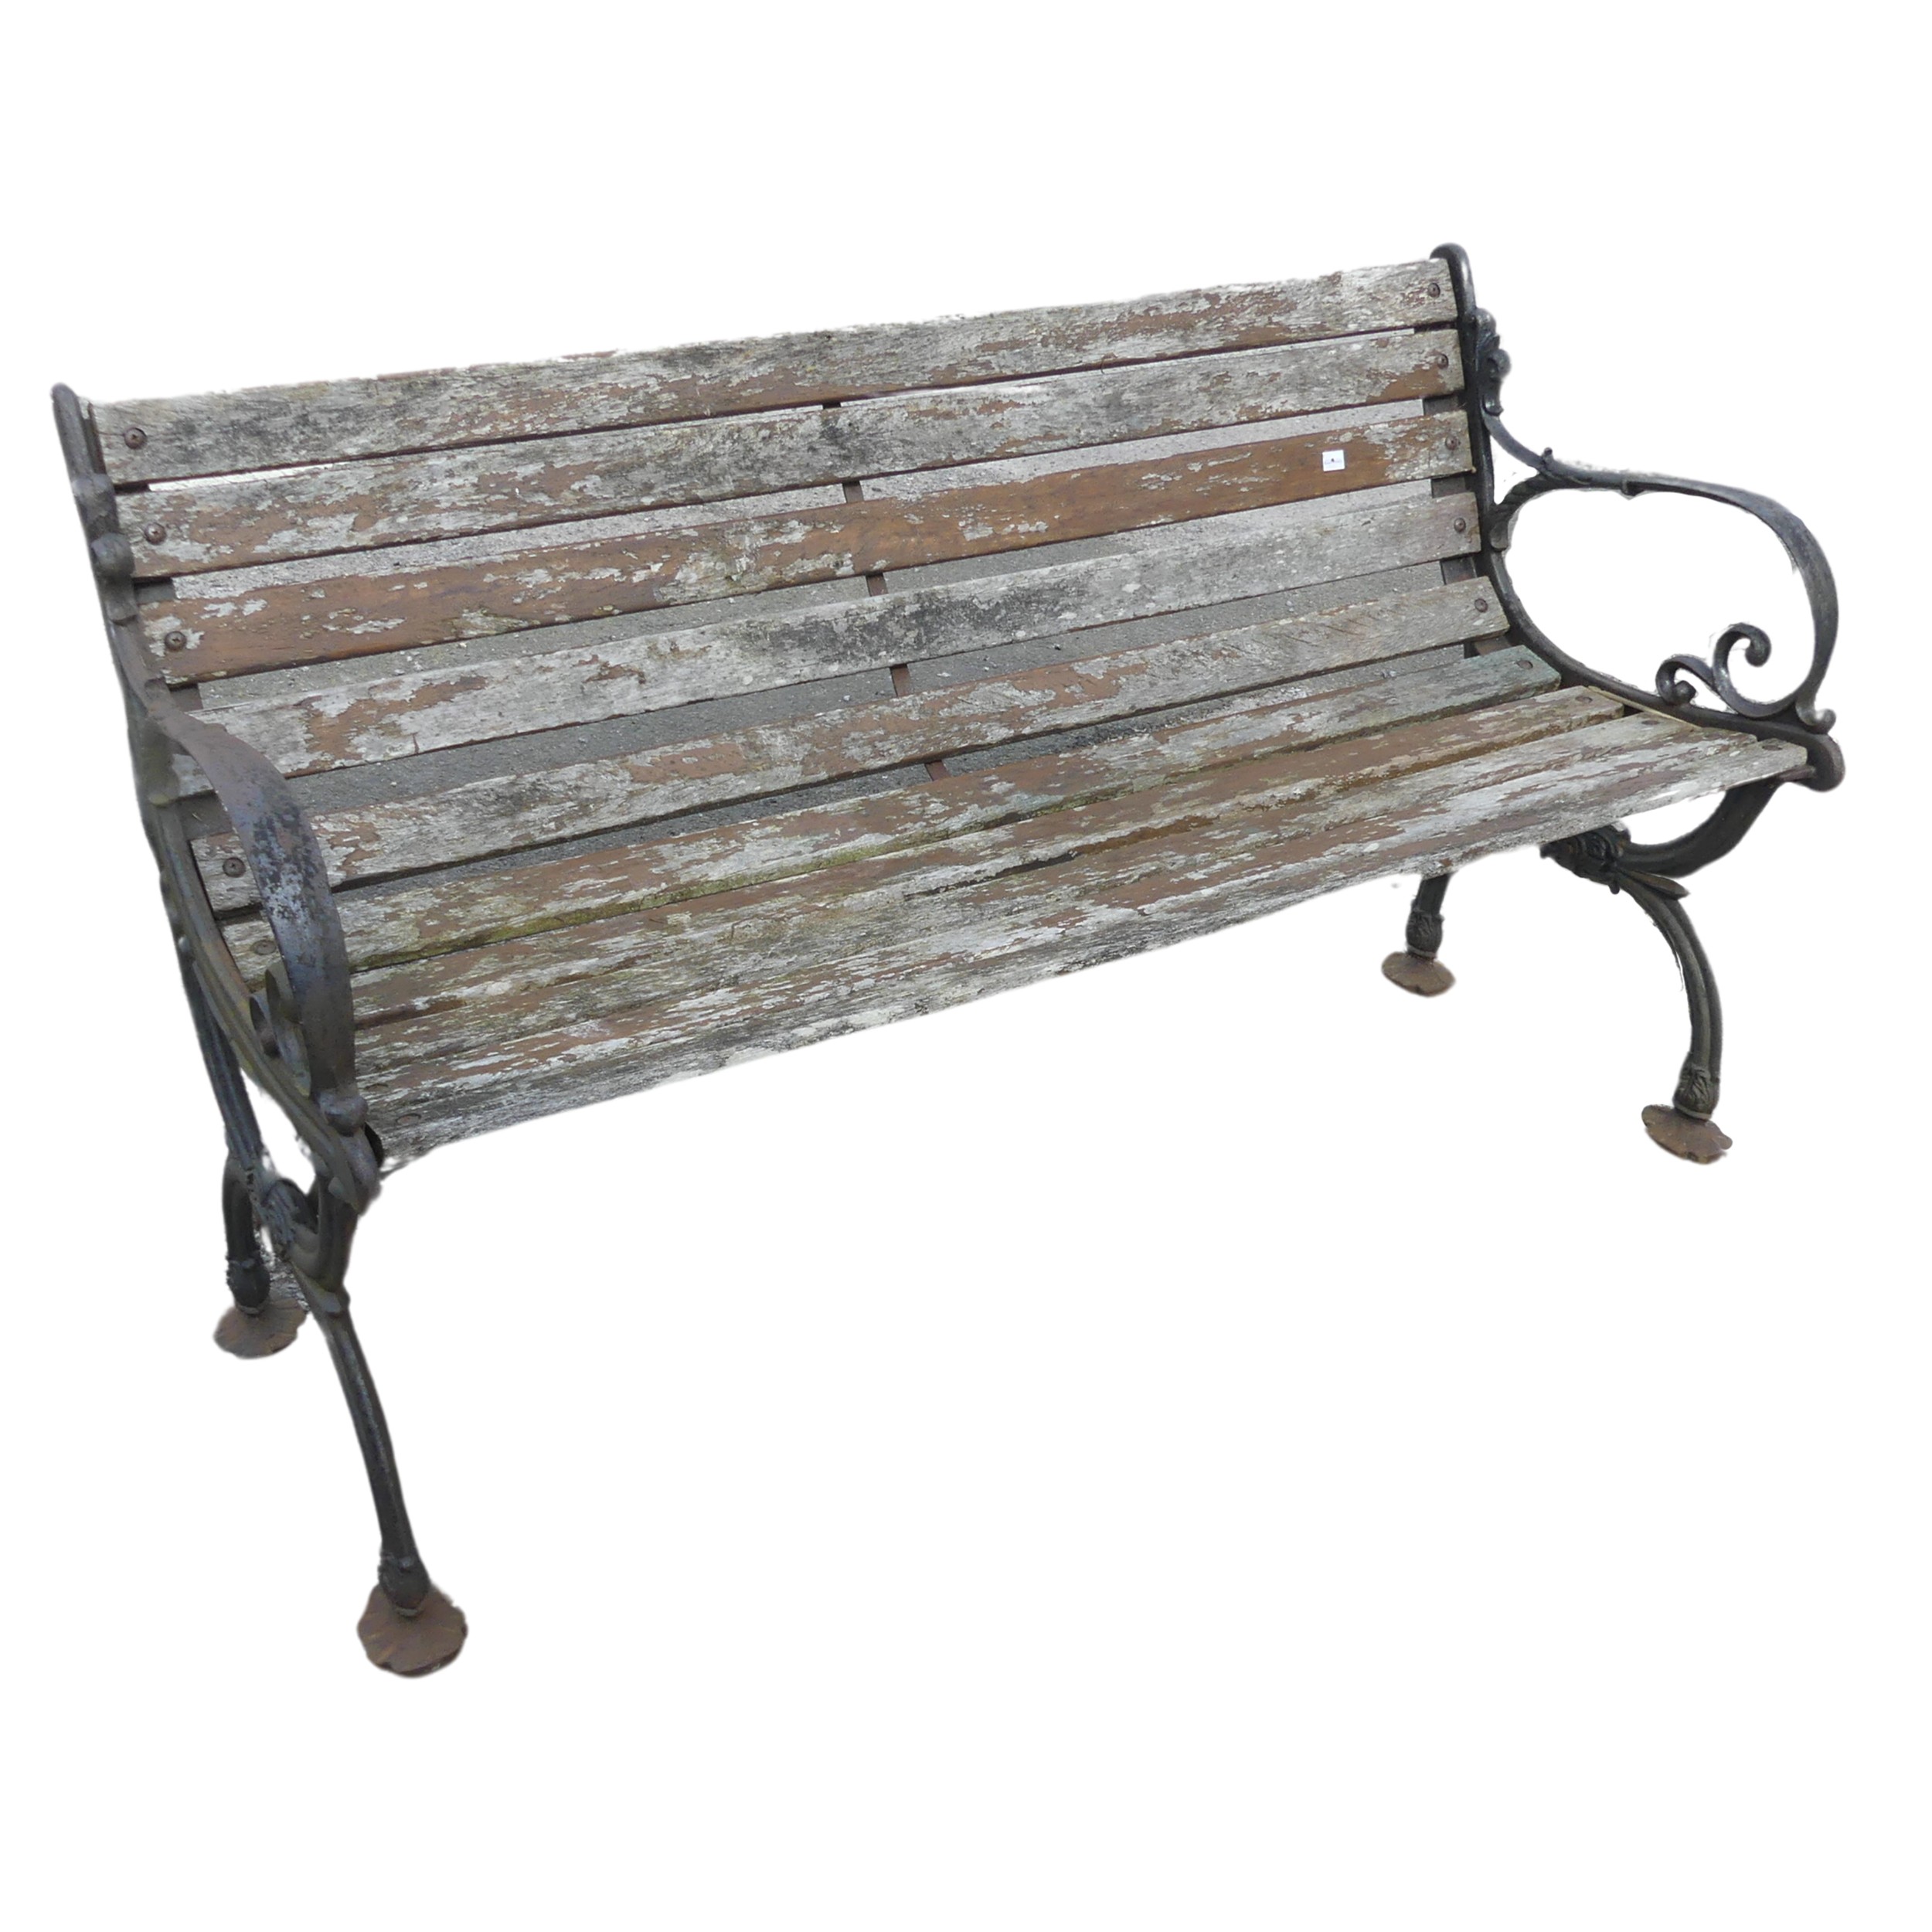 An antique cast iron and teak Garden Seat /Bench, with scrolled supports, W 129.5 cm x H 74 cm x D